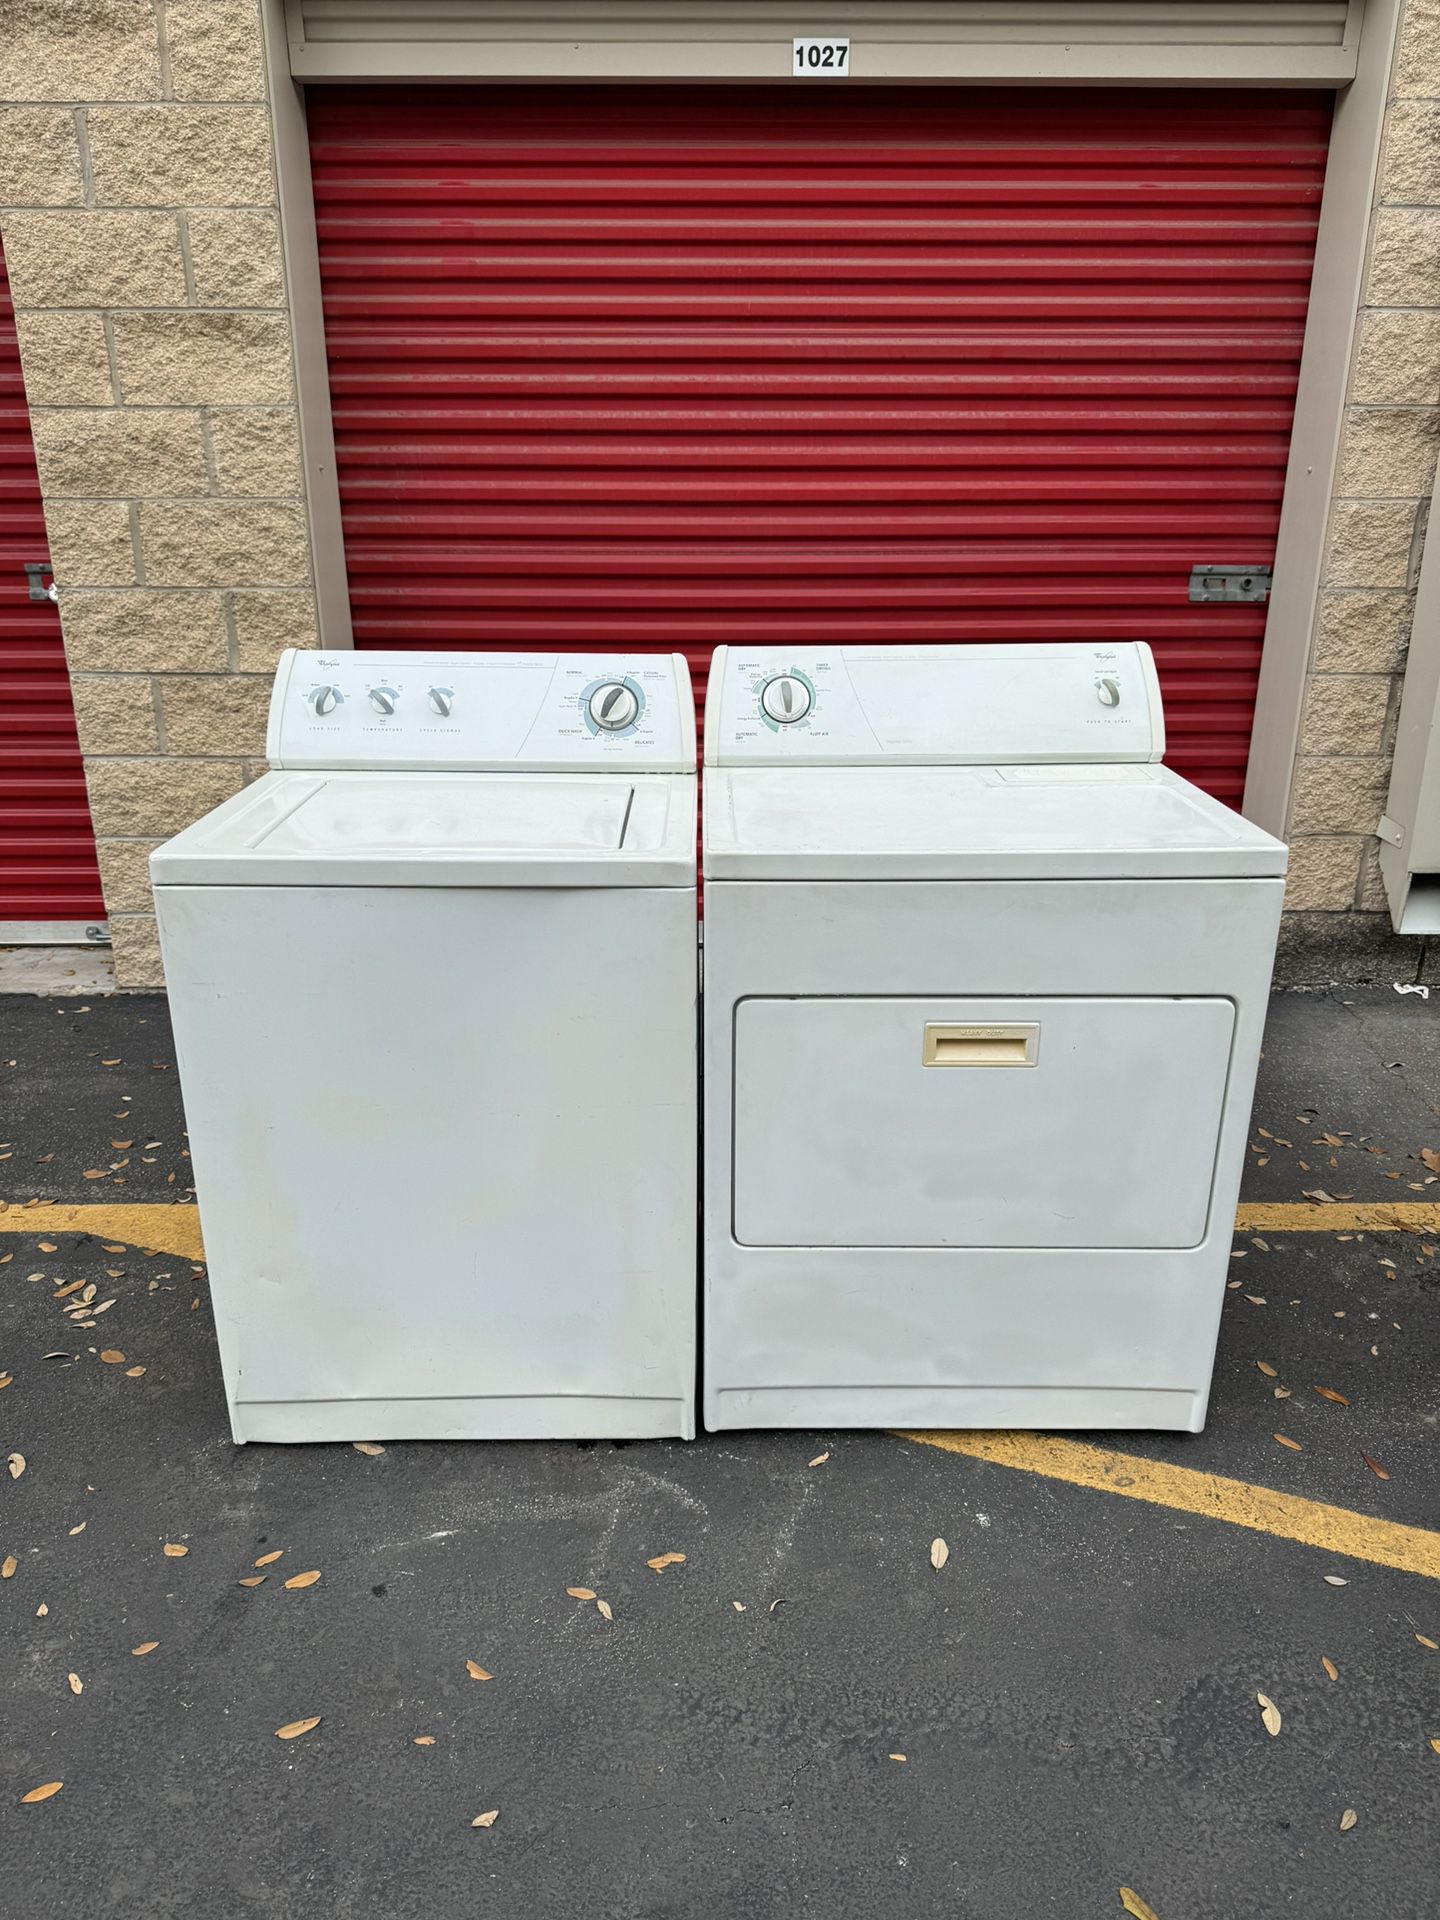 Delivery+Install! Whirlpool Washer & Dryer